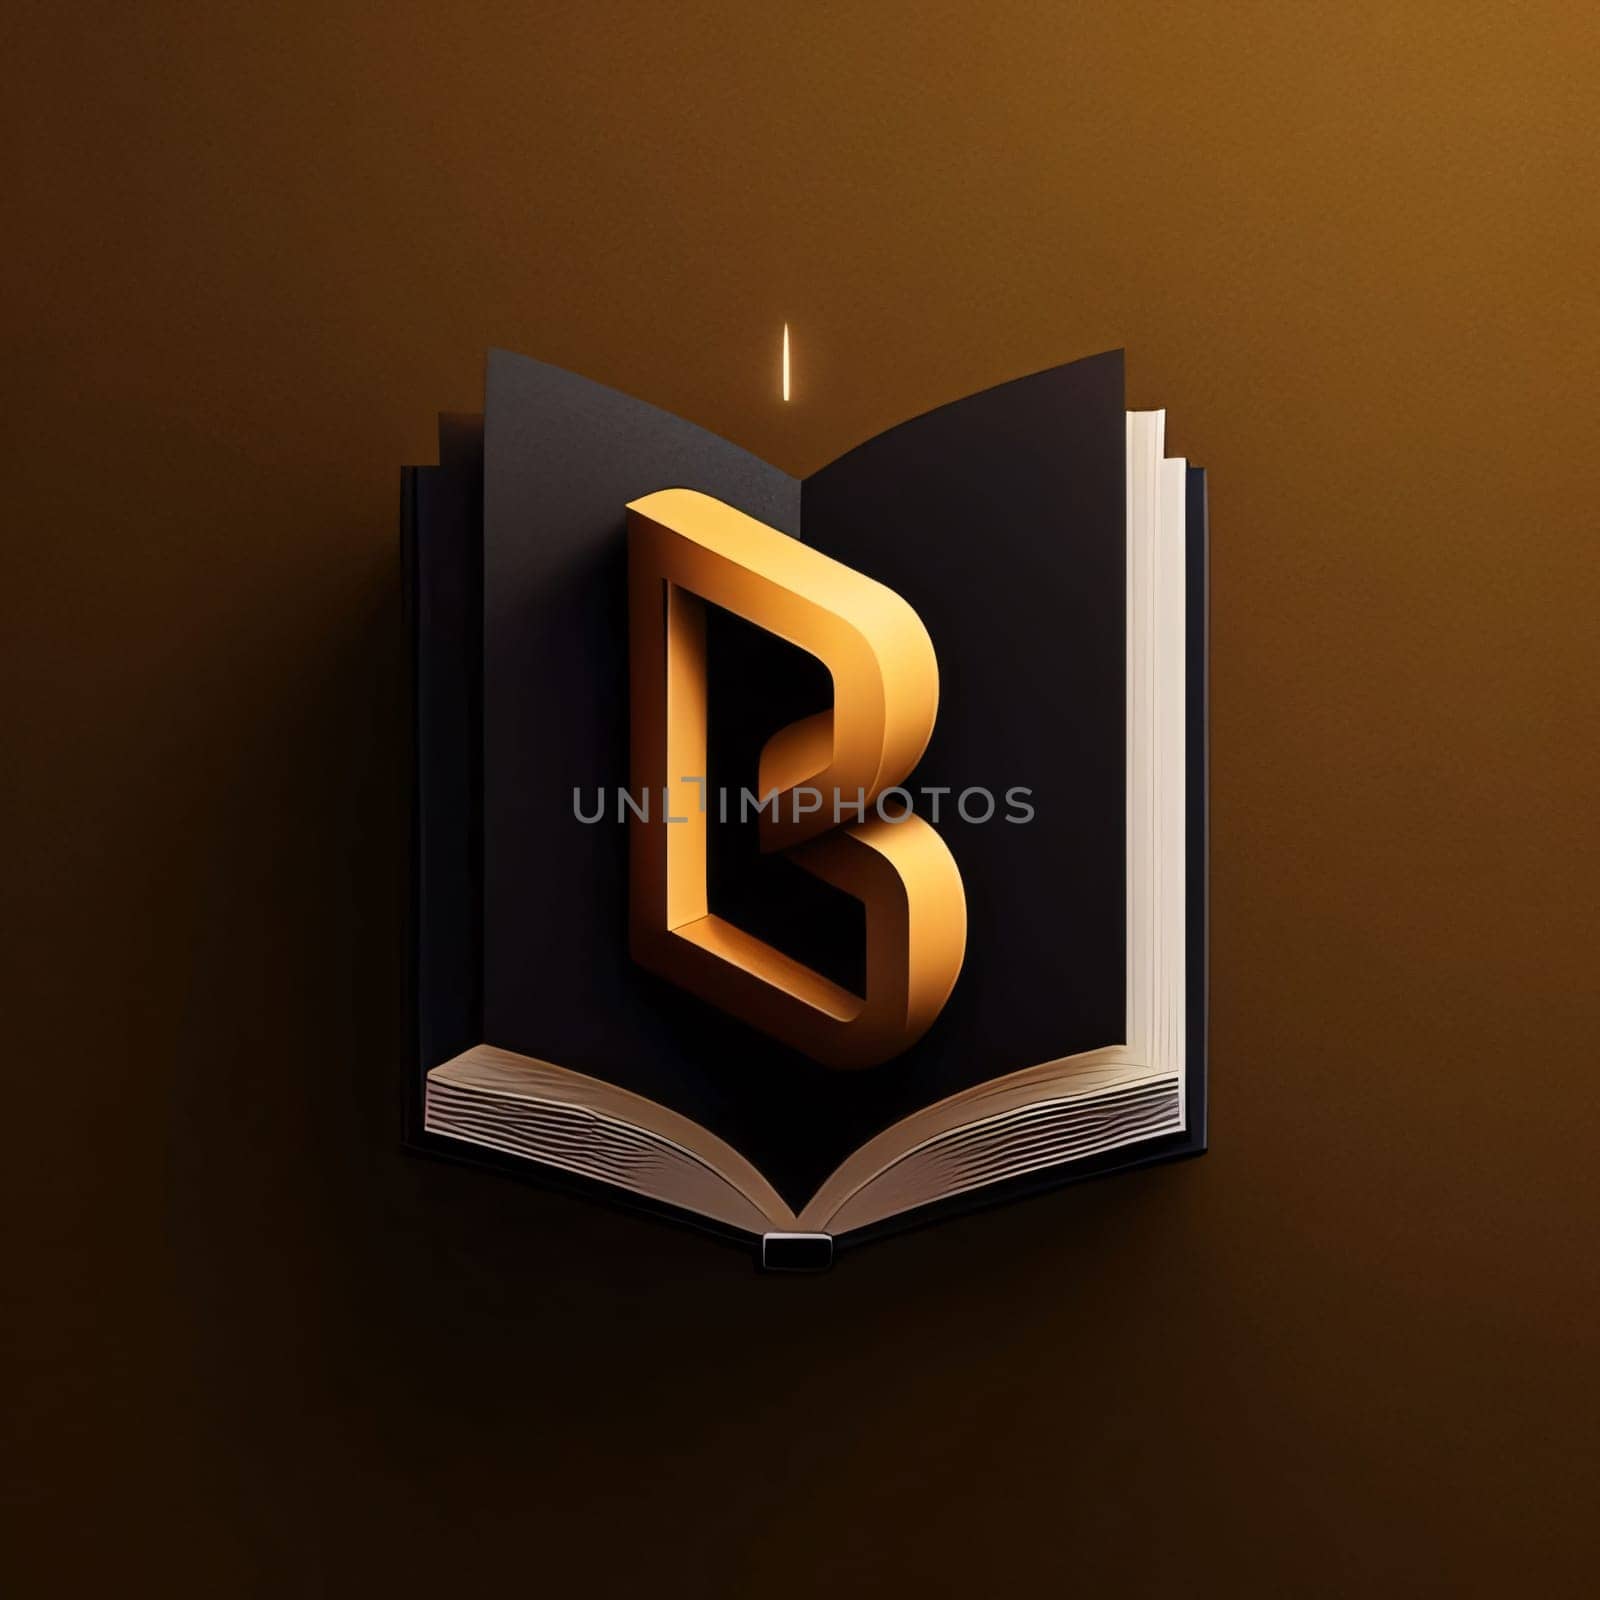 Graphic alphabet letters: Letter B in the book. 3d illustration. Isolated on brown background.